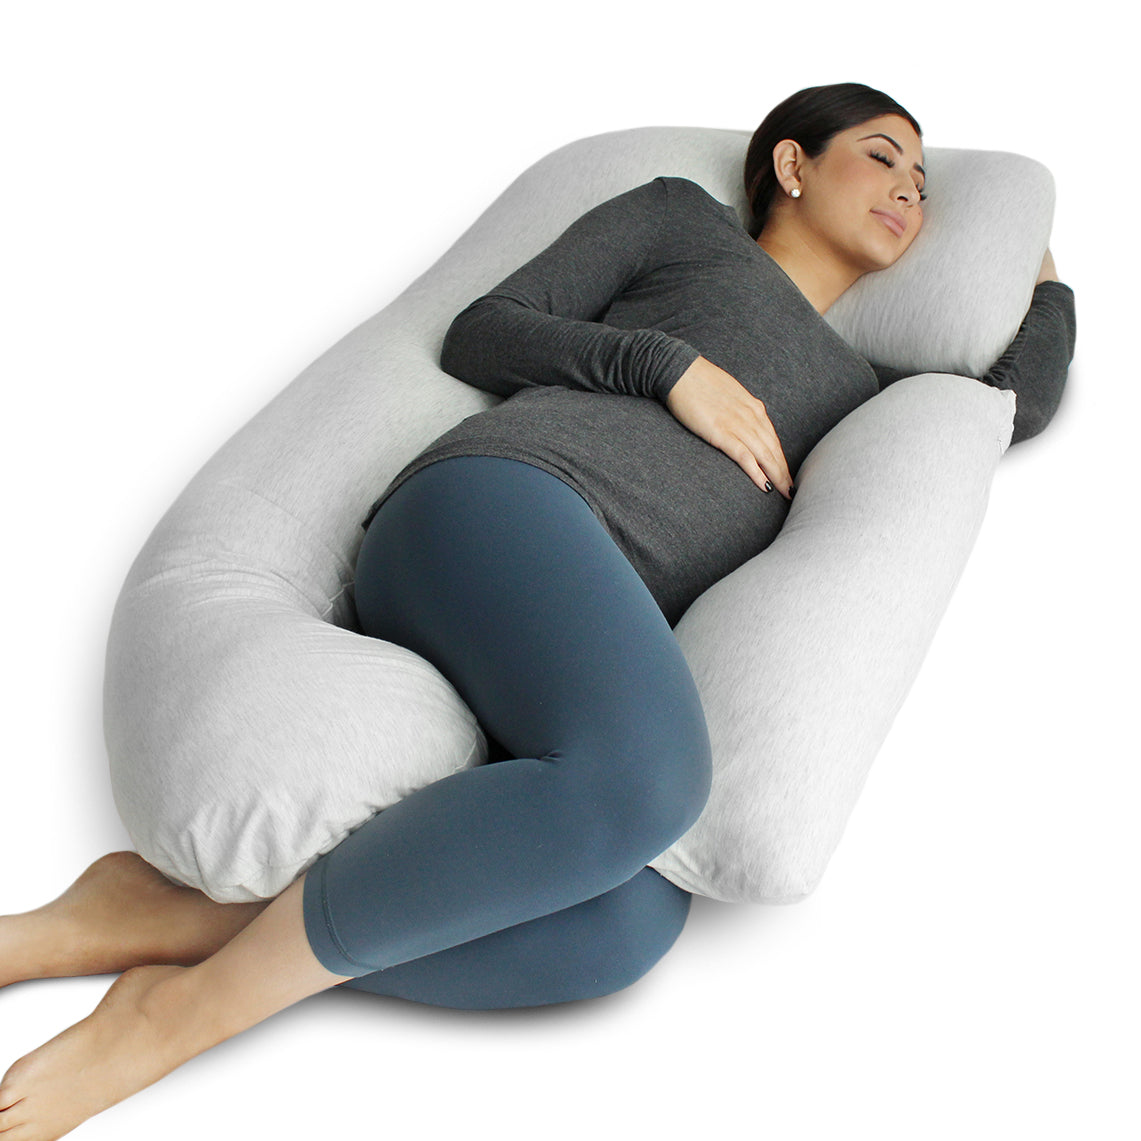 12FT Comfort U Pillow Only Full Body Back Support Maternity Pregnancy U- pillow 